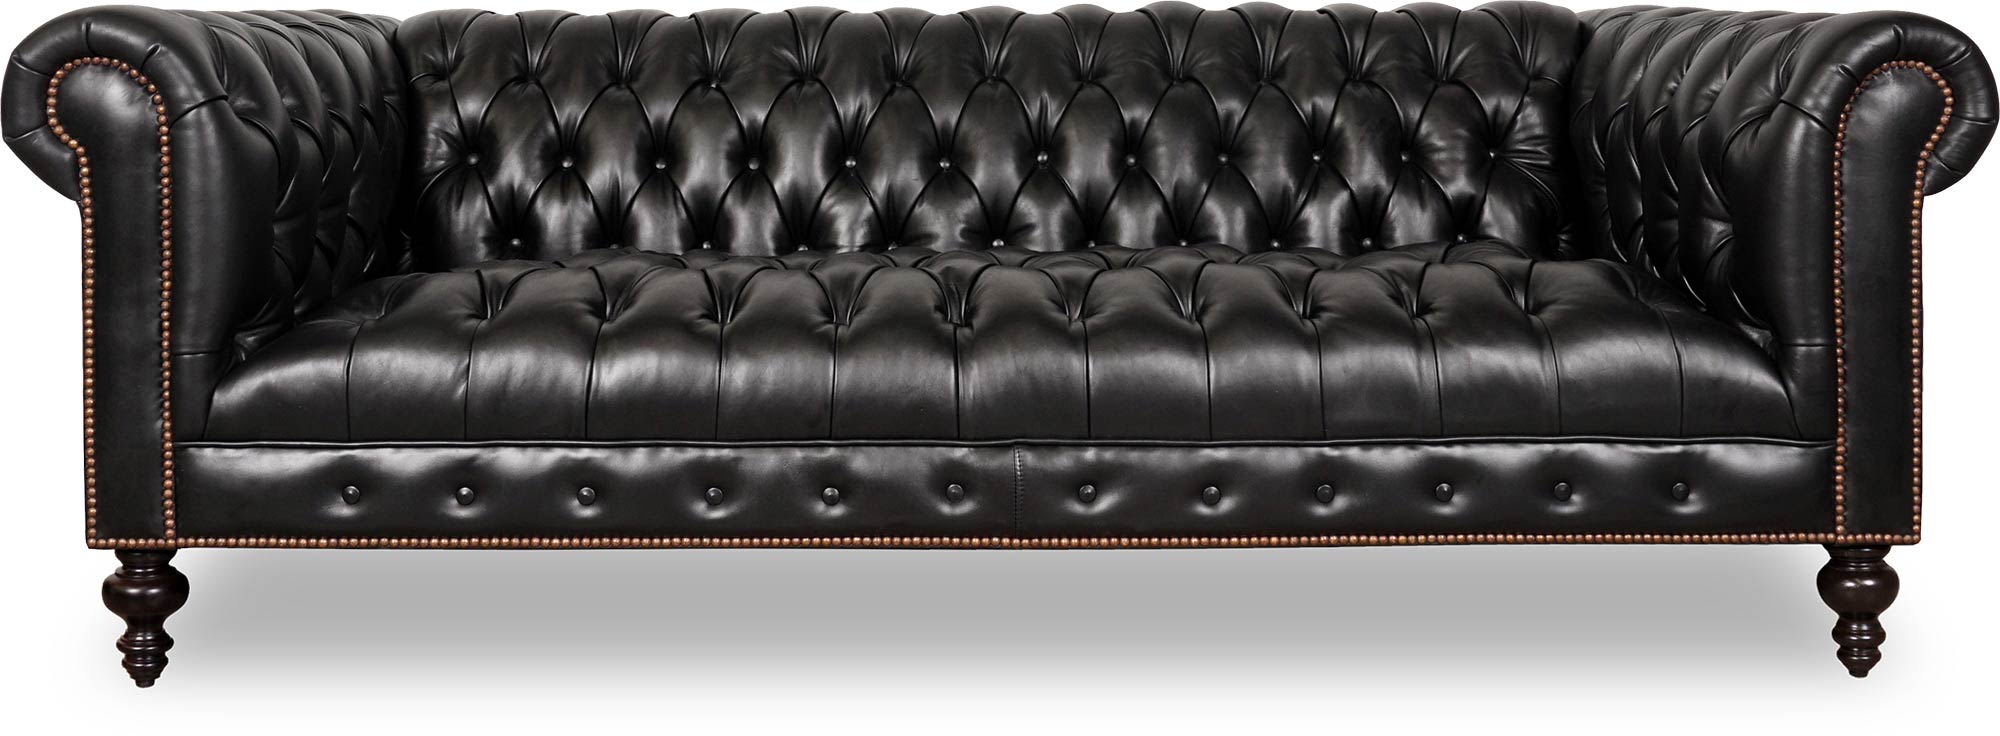 Chesterfield Sofas Armchairs, Black Leather Tufted Couch